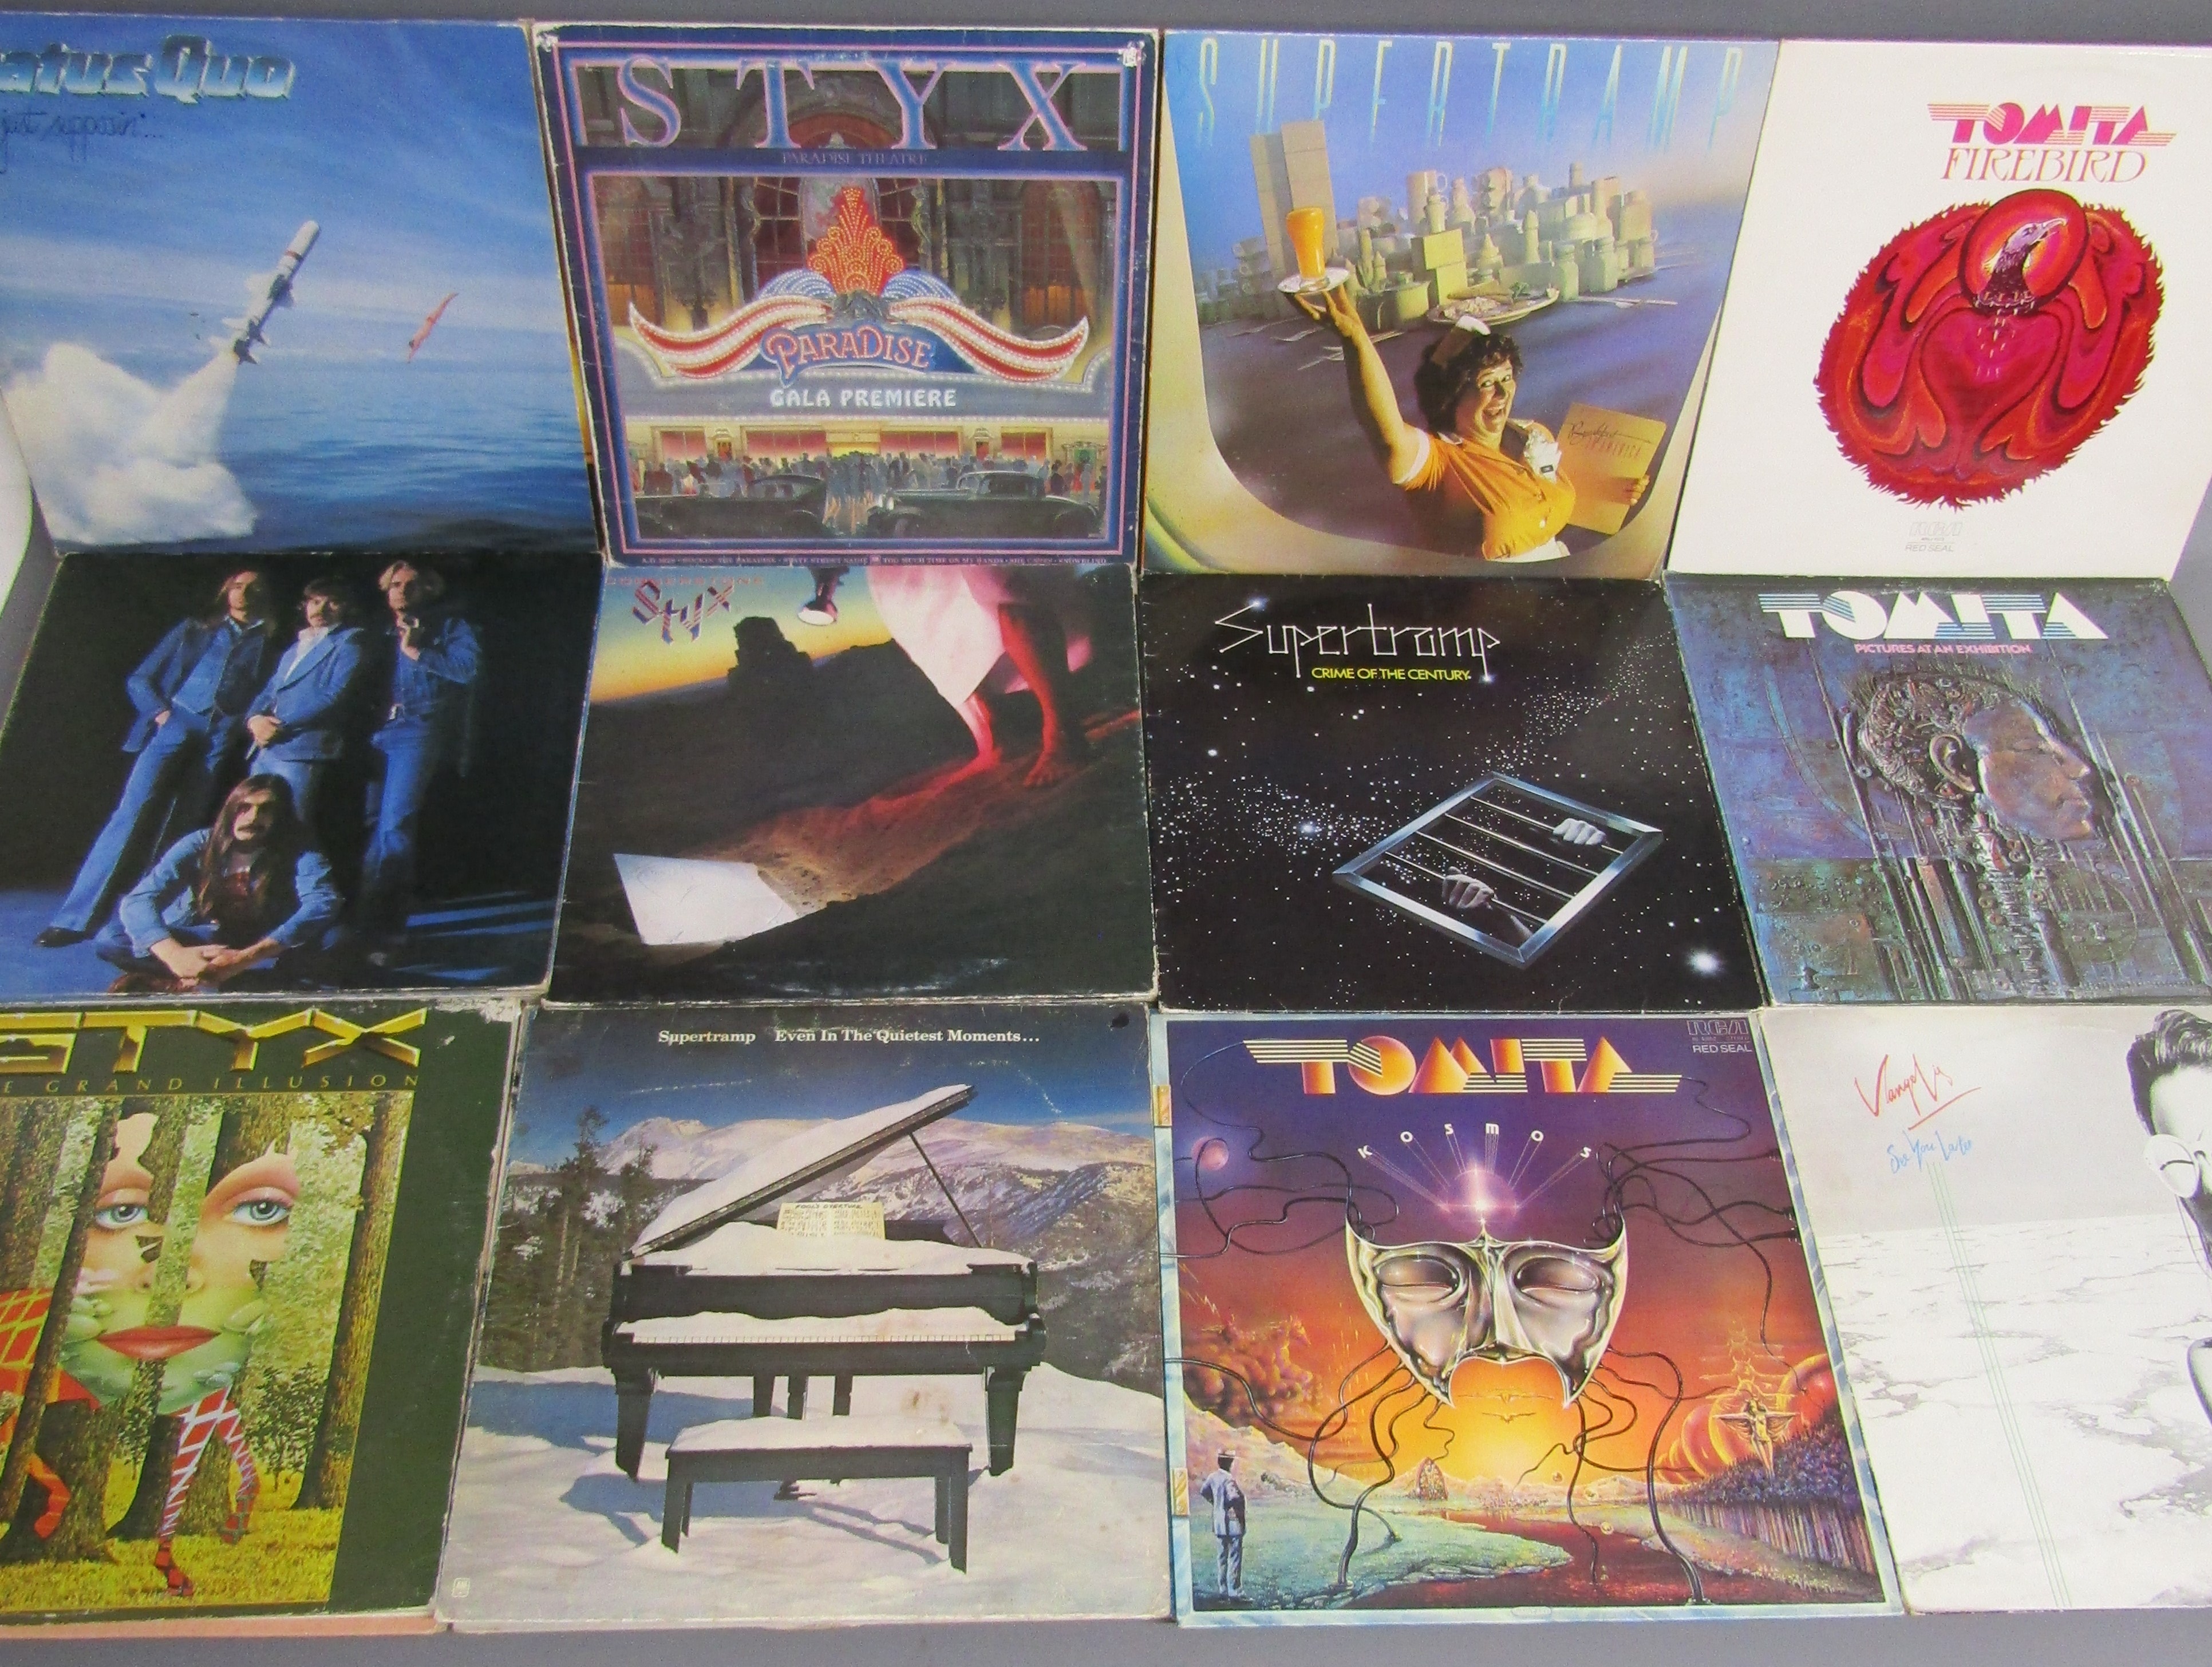 Collection of approx. 80 vinyl LP records includes Jean Michel Jarre, The Moody Blues, Santana, - Image 7 of 7